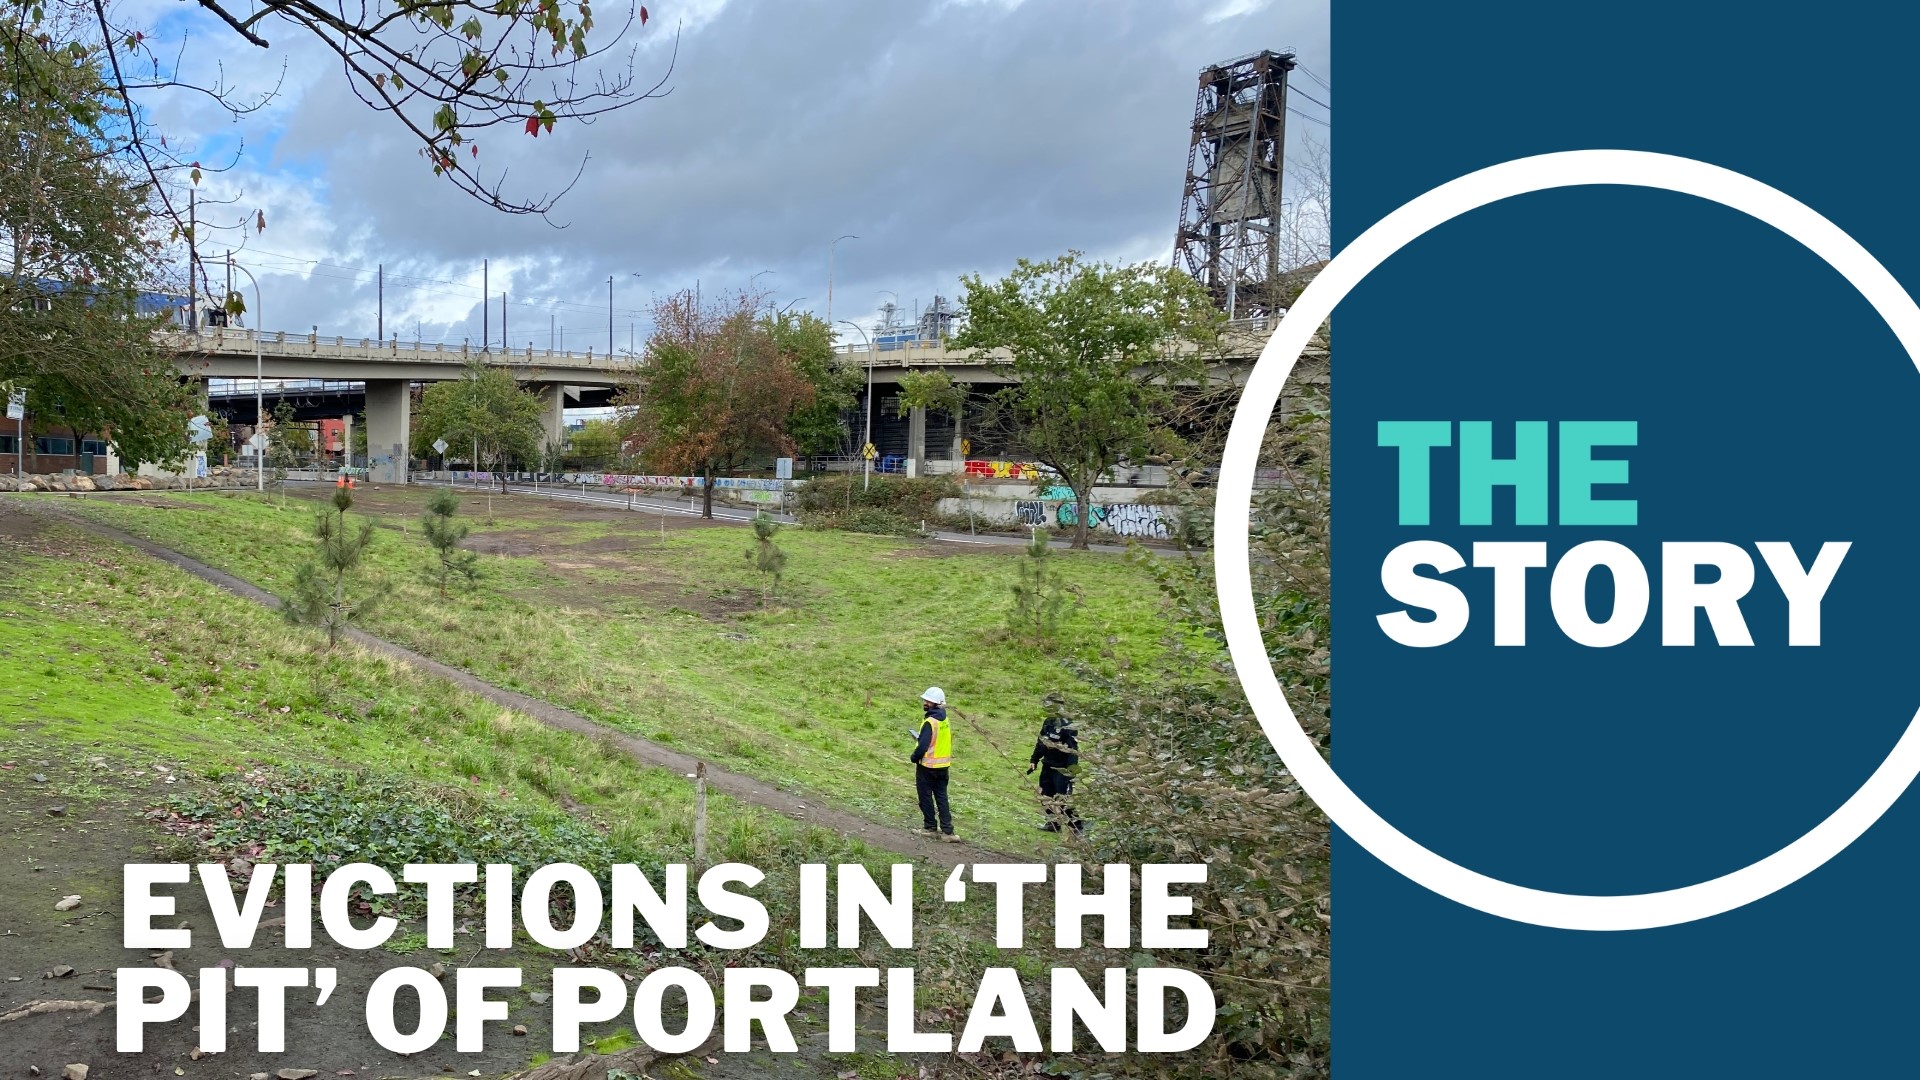 Private security guards have begun to patrol the site of the former homeless camp near the Streel Bridge onramp in Portland's Old Town neighborhood.